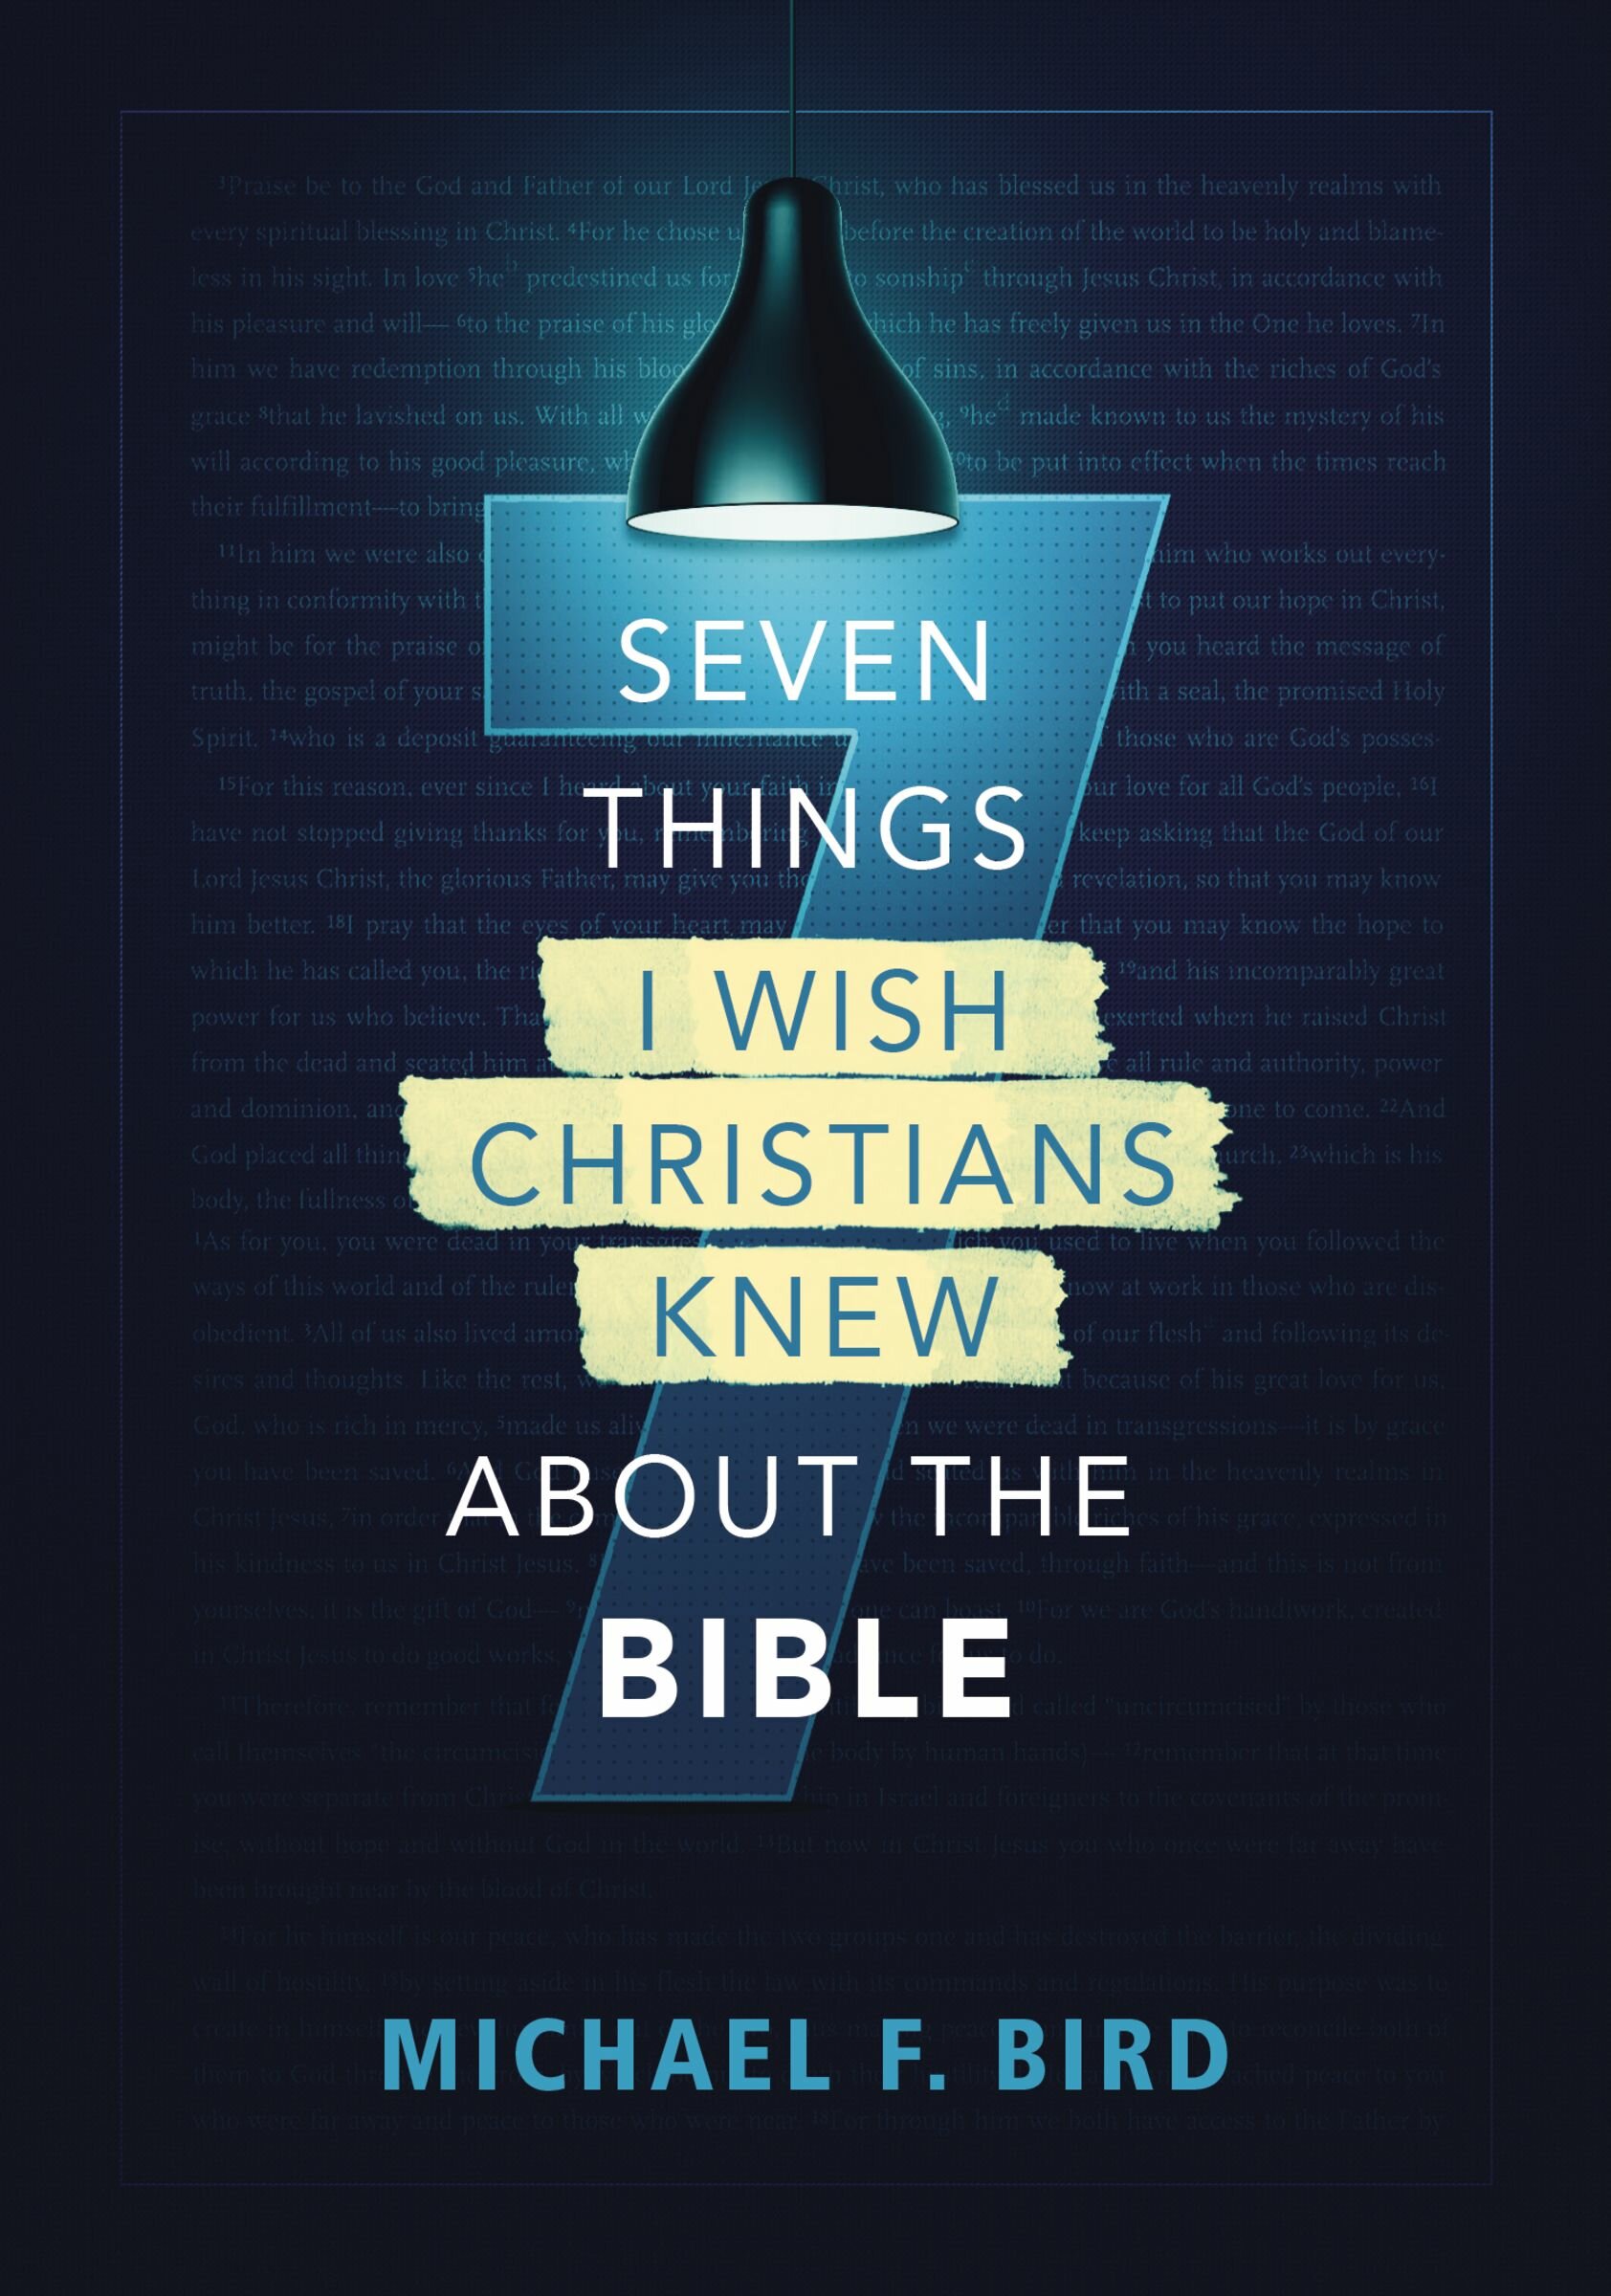 7 Things I Wish Christians Knew about the Bible